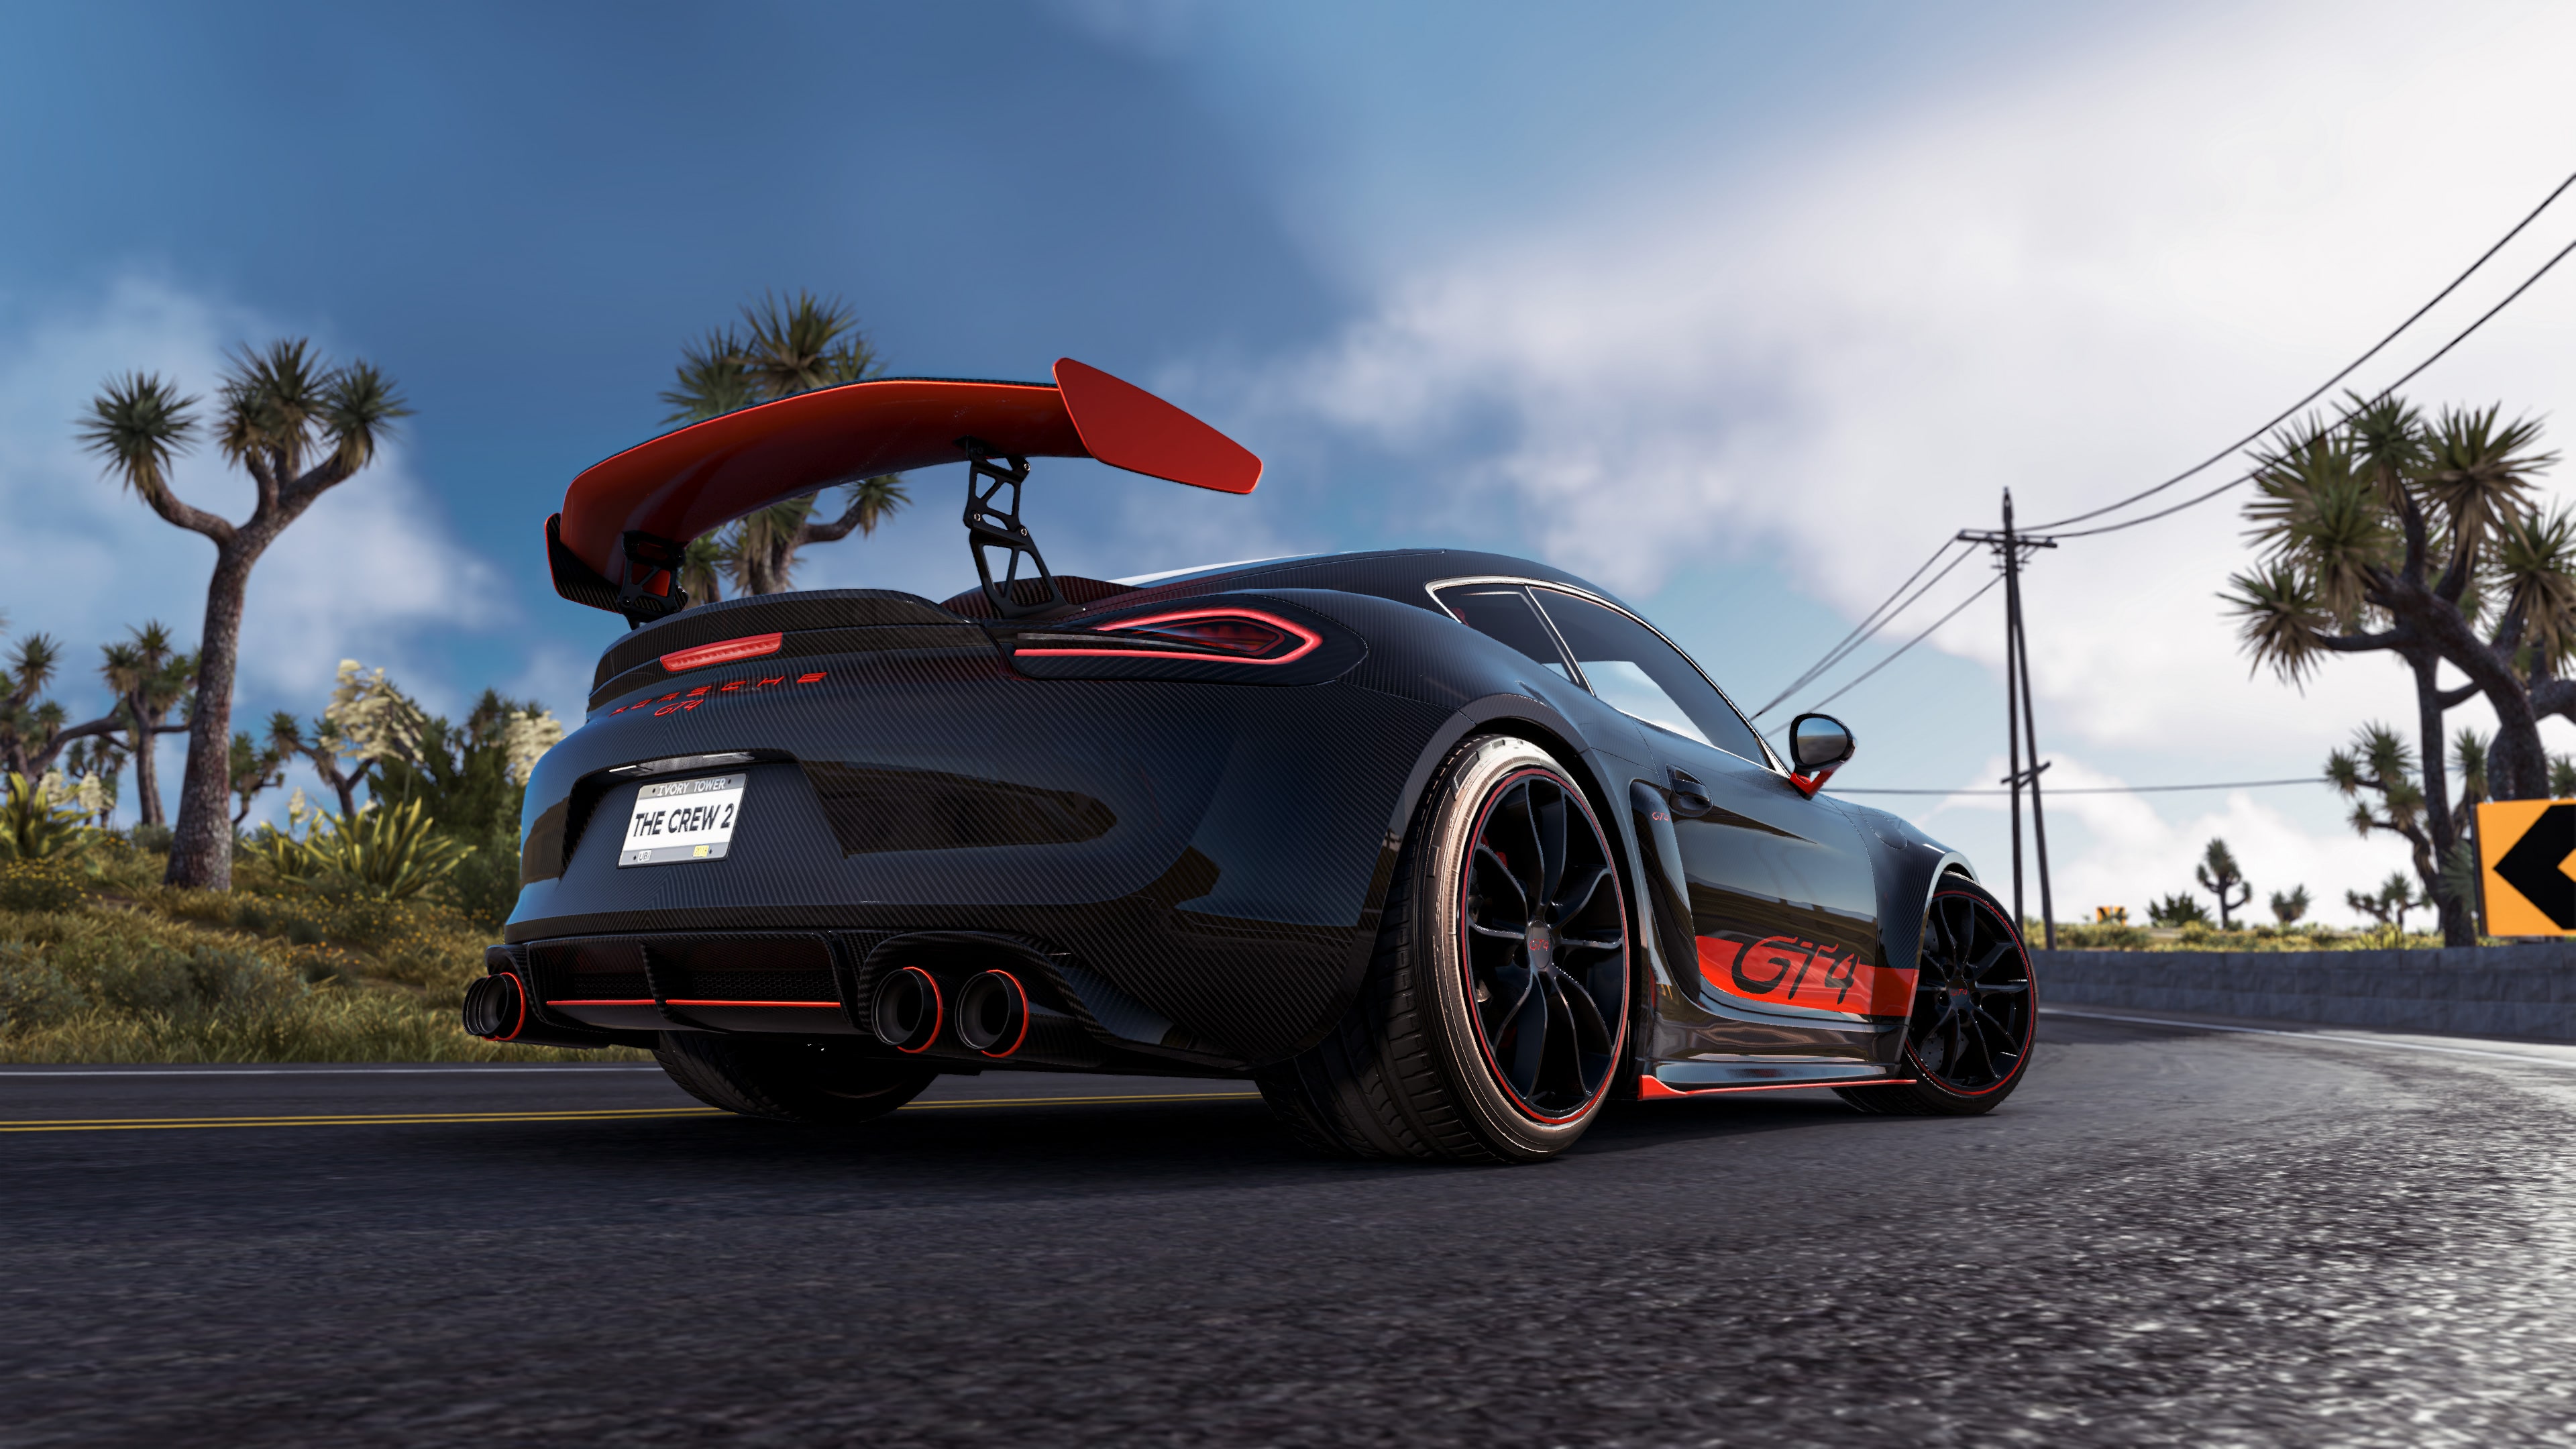 The Crew 2 on PS4 — price history, screenshots, discounts • USA